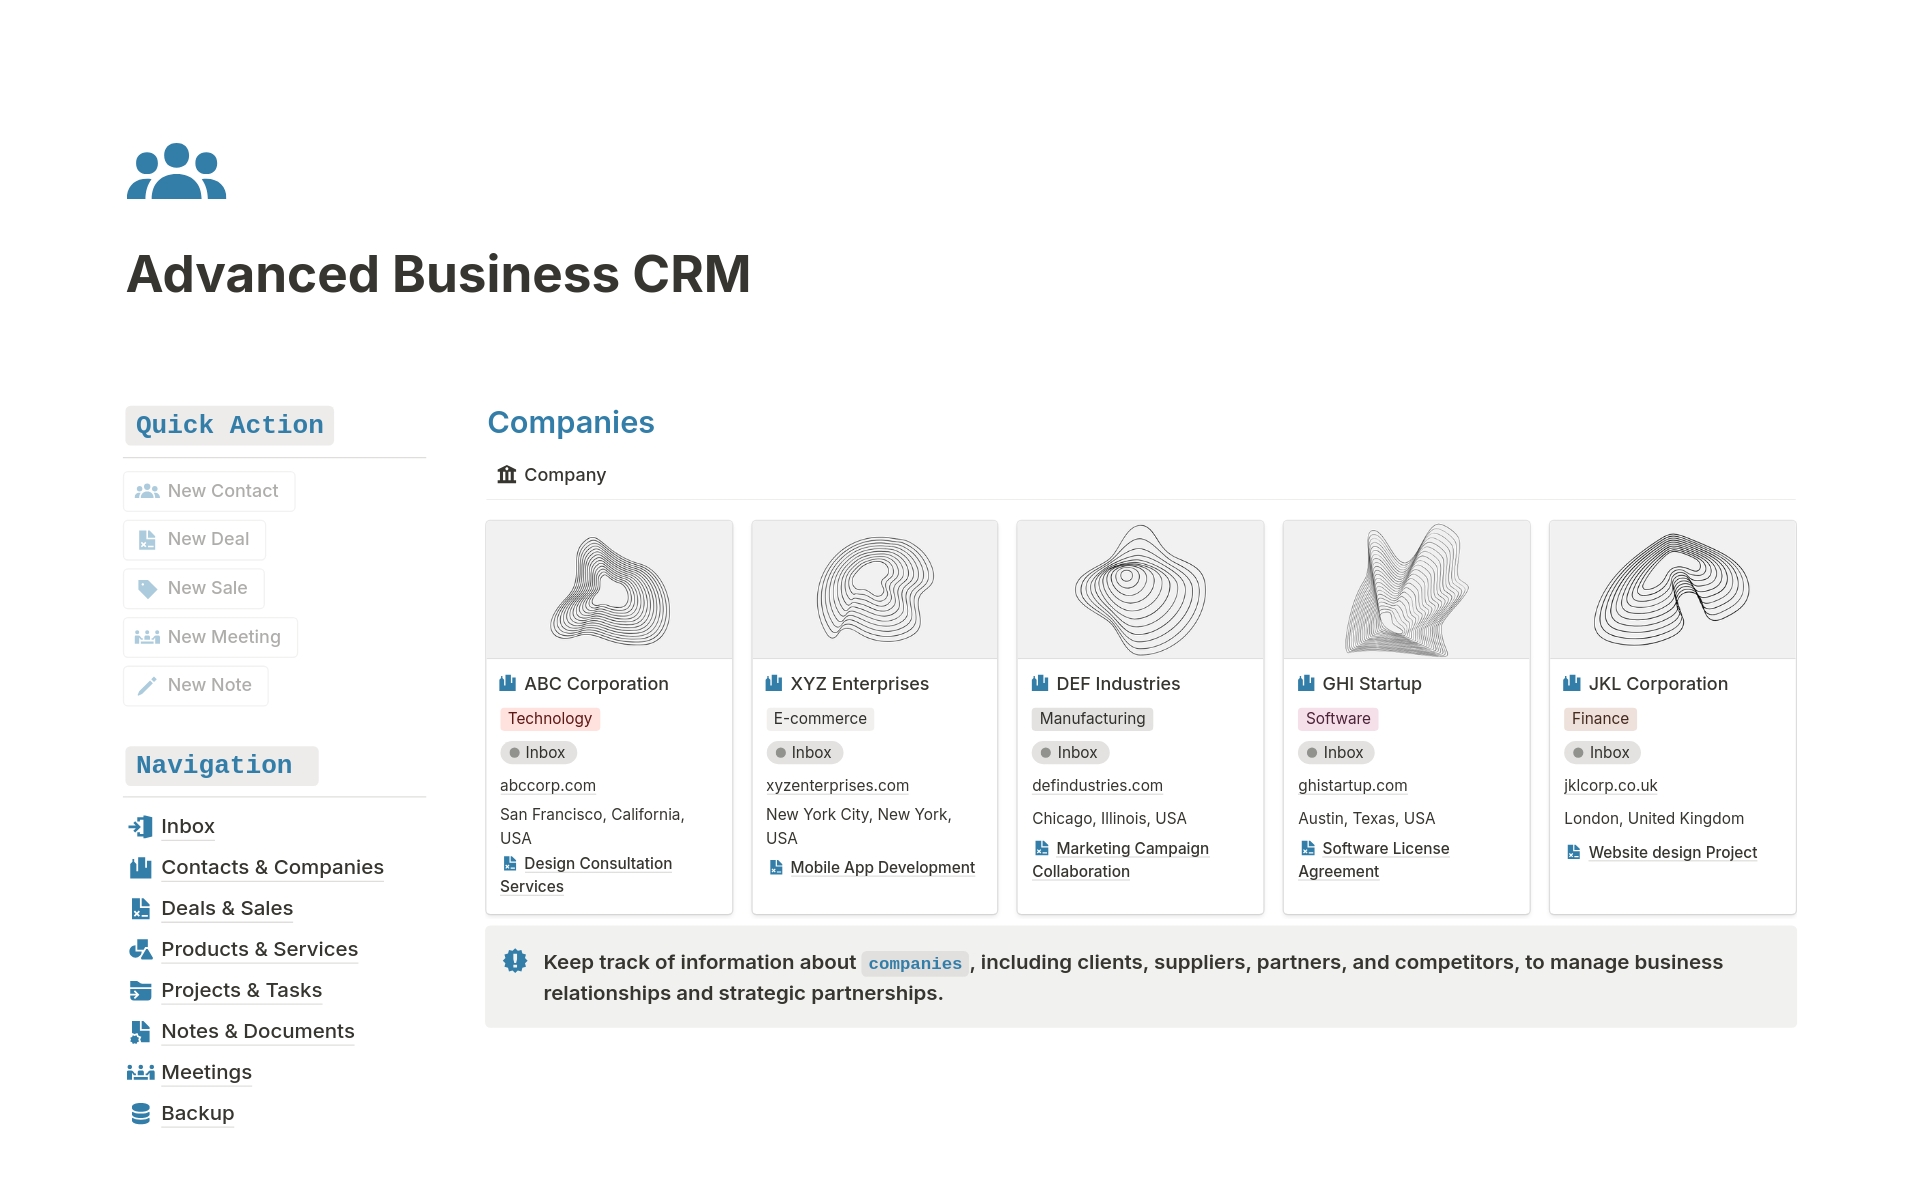 The All-in-One Business CRM Notion Template